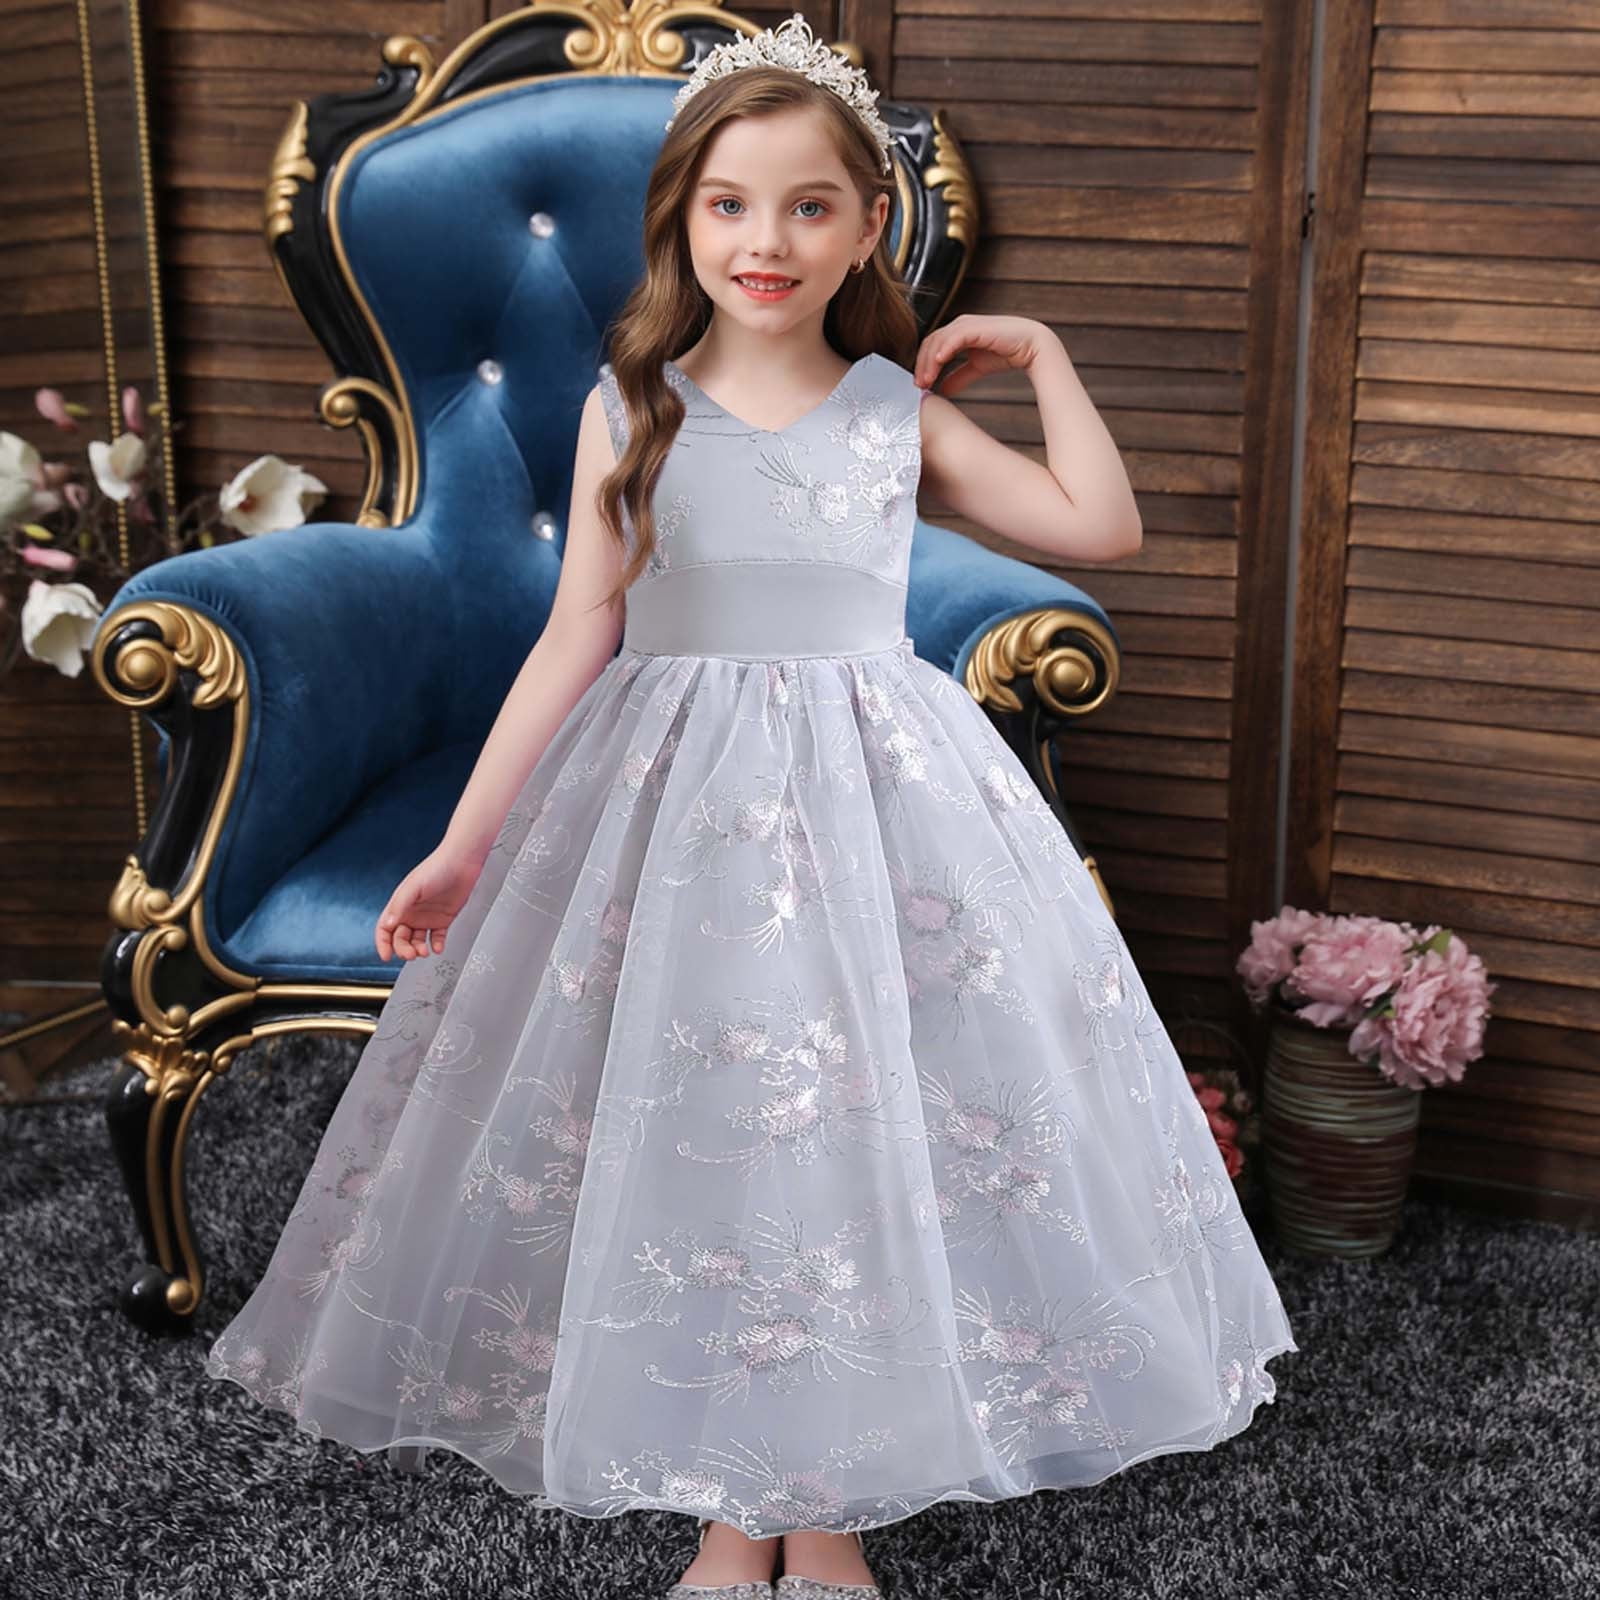 12 Flower Girl Dresses Sure to Make an Impression | PreOwned Wedding Dresses  | Girls couture dresses, Girls long dresses, Girls dresses